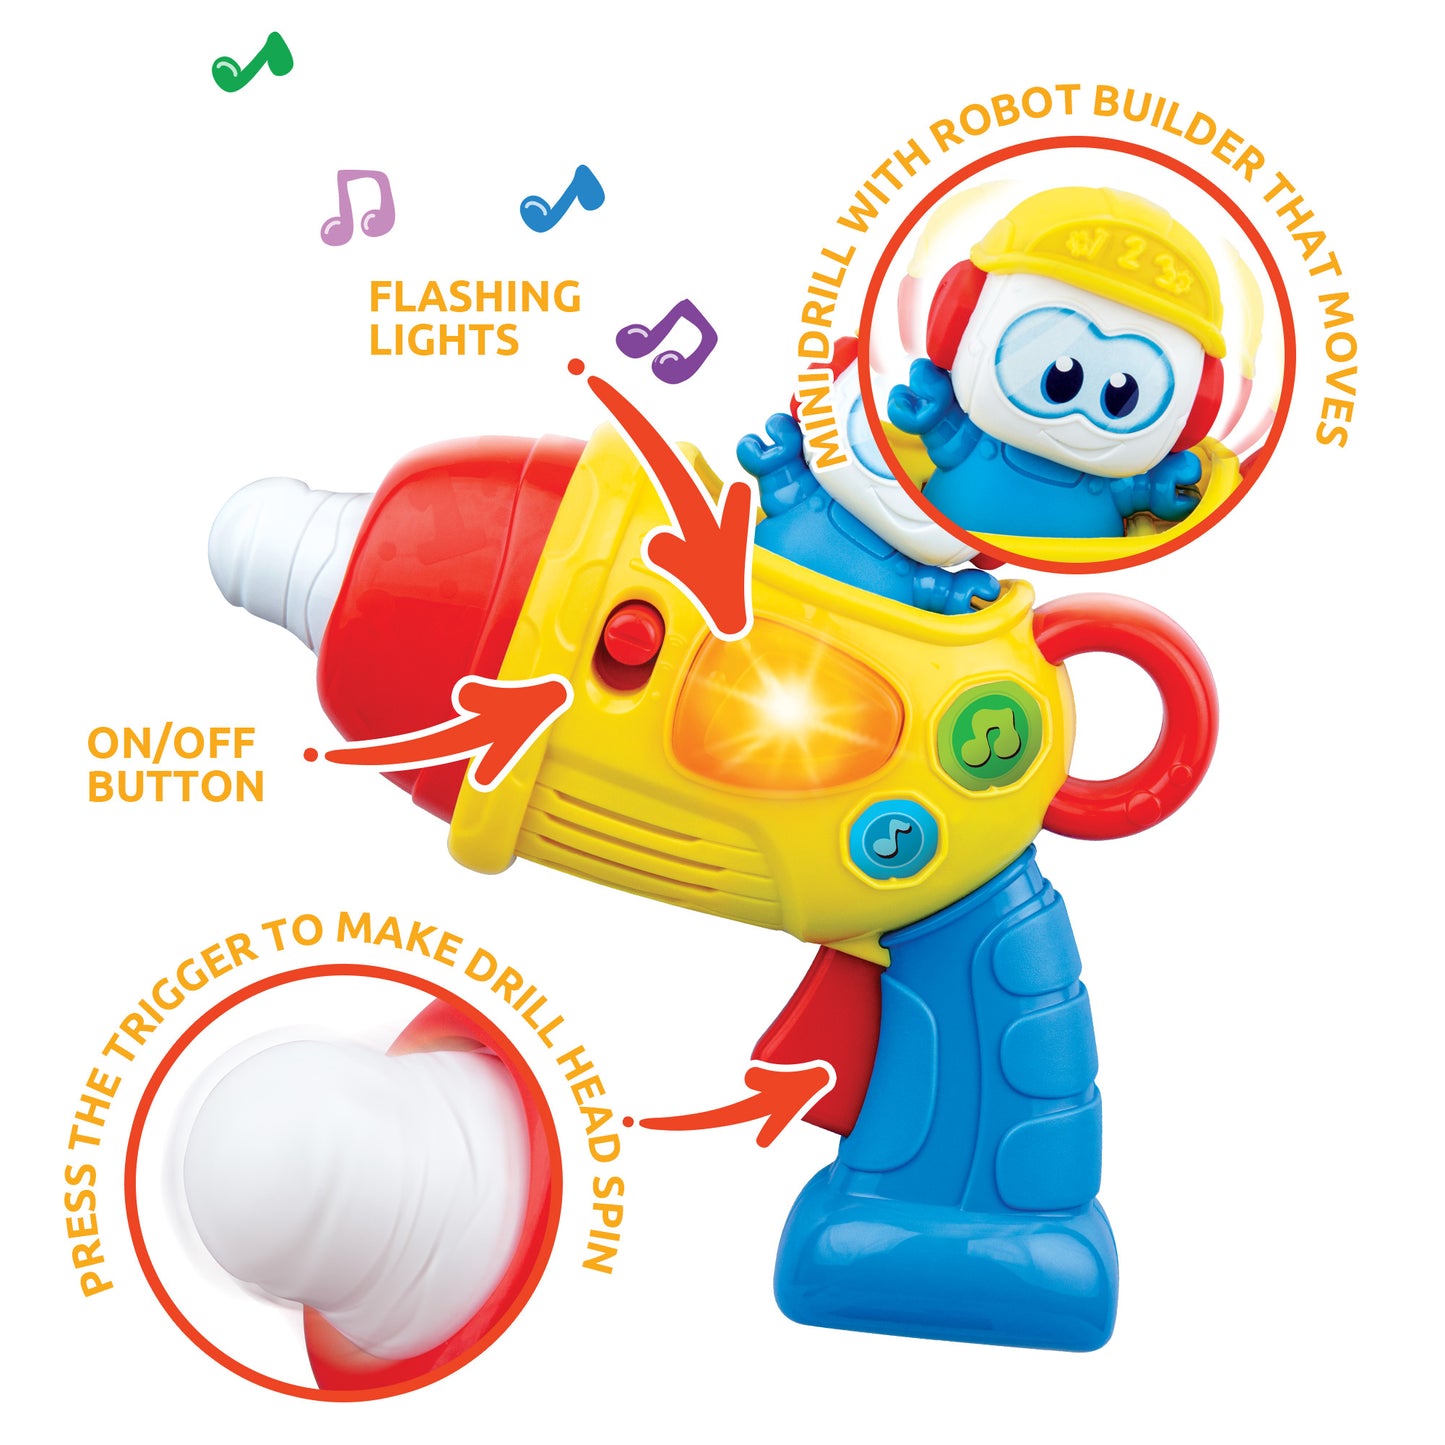 Kiddolab The Little Builder Drill - Kids Musical Spinning Drill Toy with Easy to Press Button, Flashing Lights - Toddler Power Tools with Music & Robot Builder Figure - Gift for Babies Age 6 Months Up